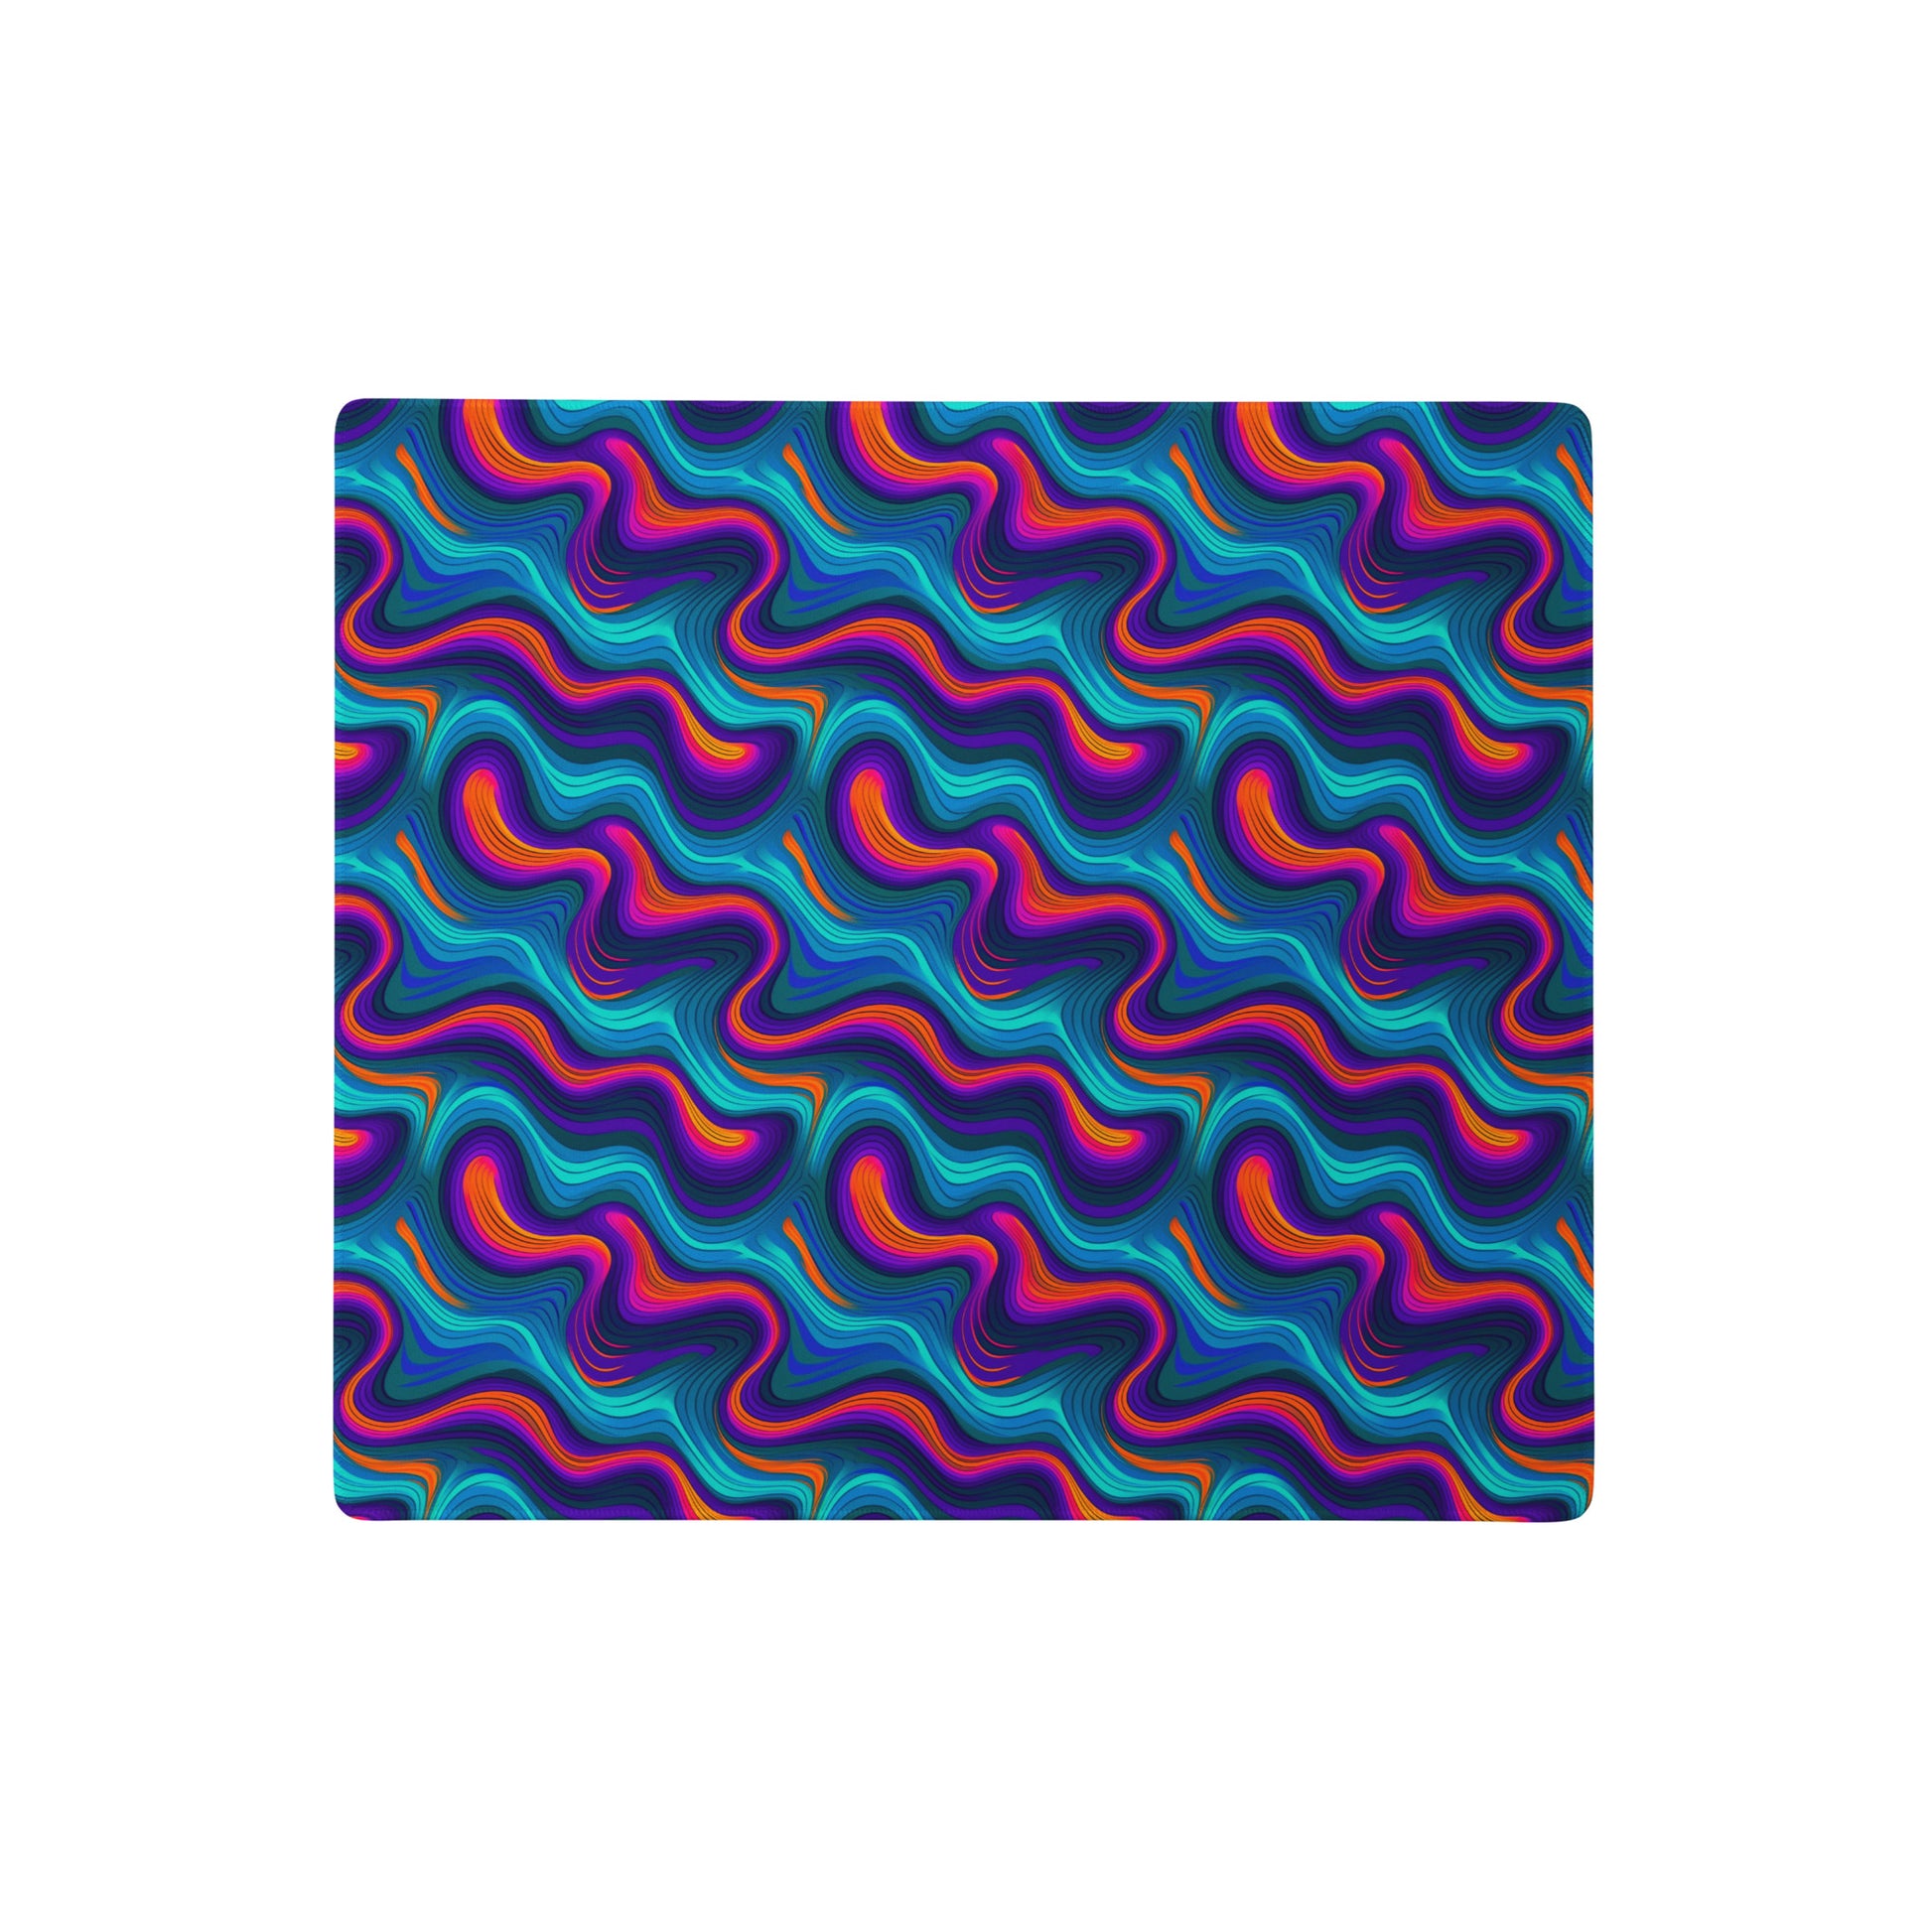 A 18" x 16" desk pad with blue and orange wavy pattern.